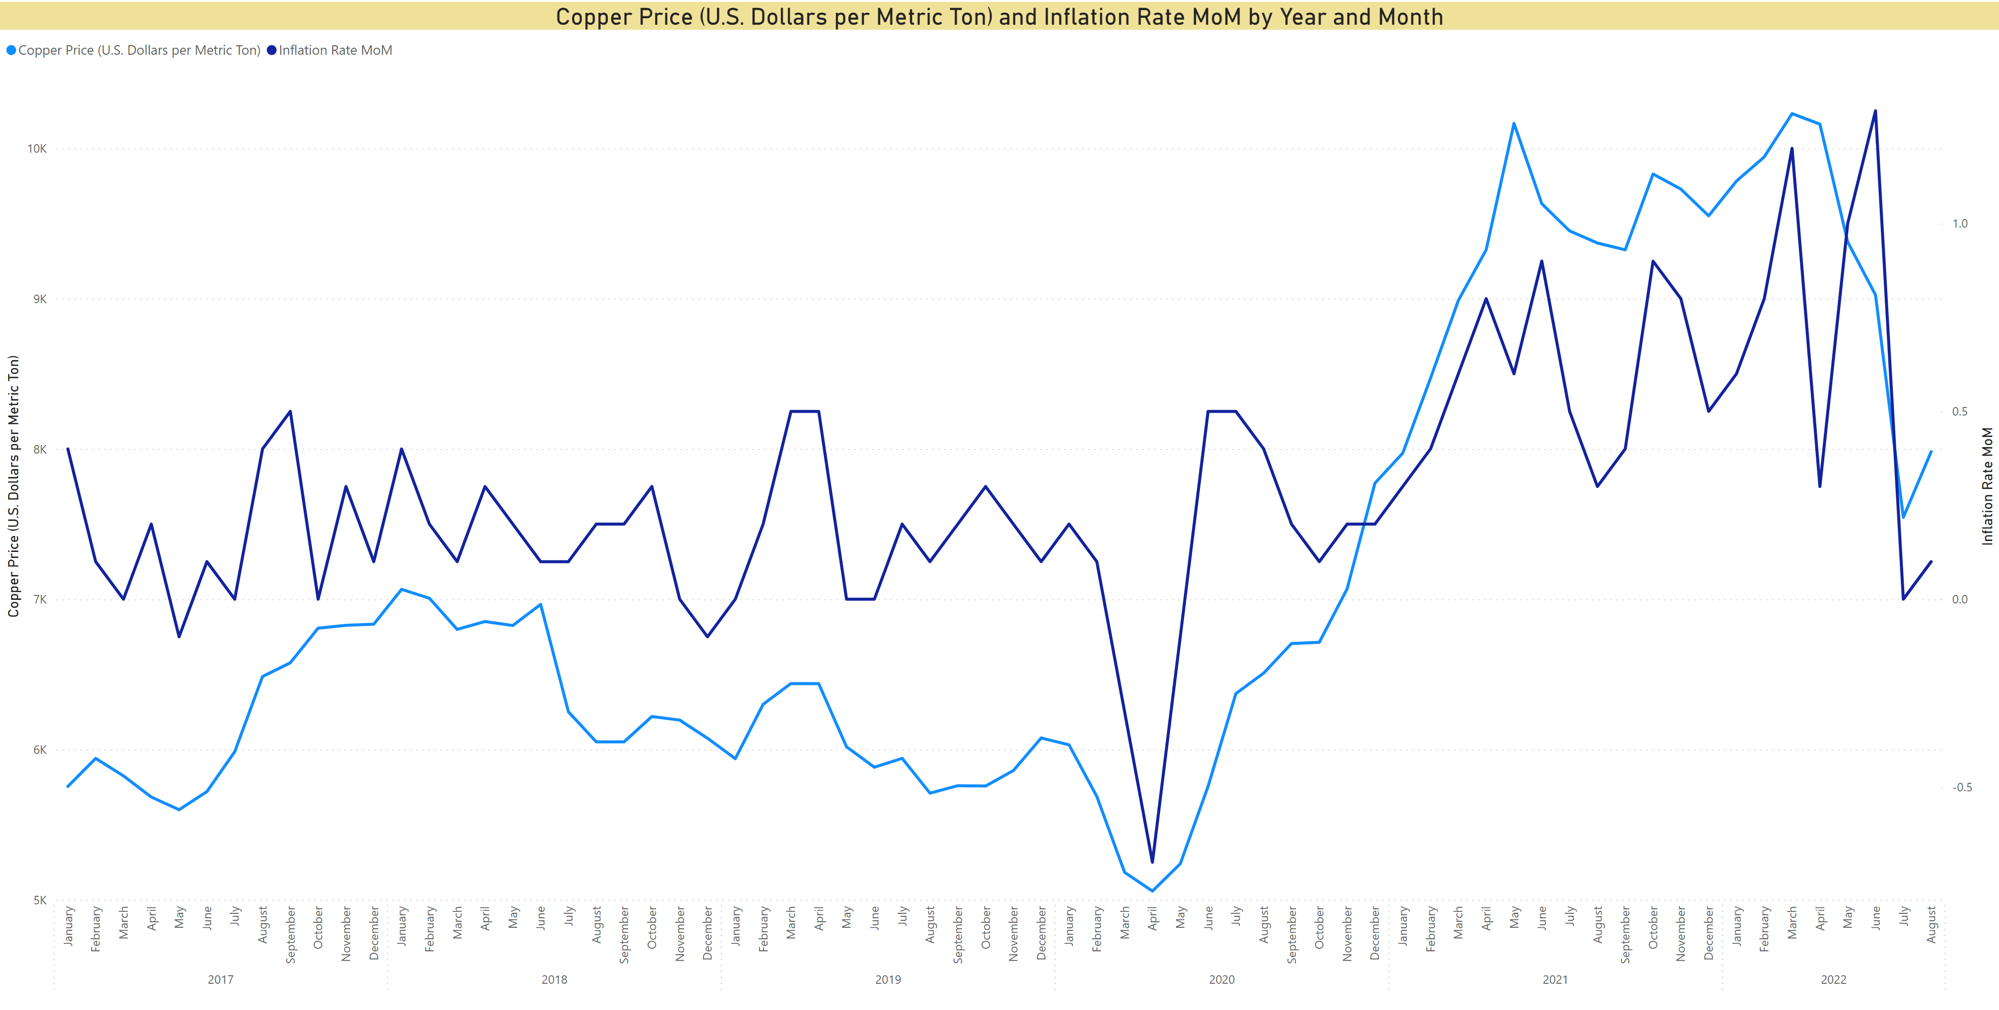 Copper Price and Inflation Rate